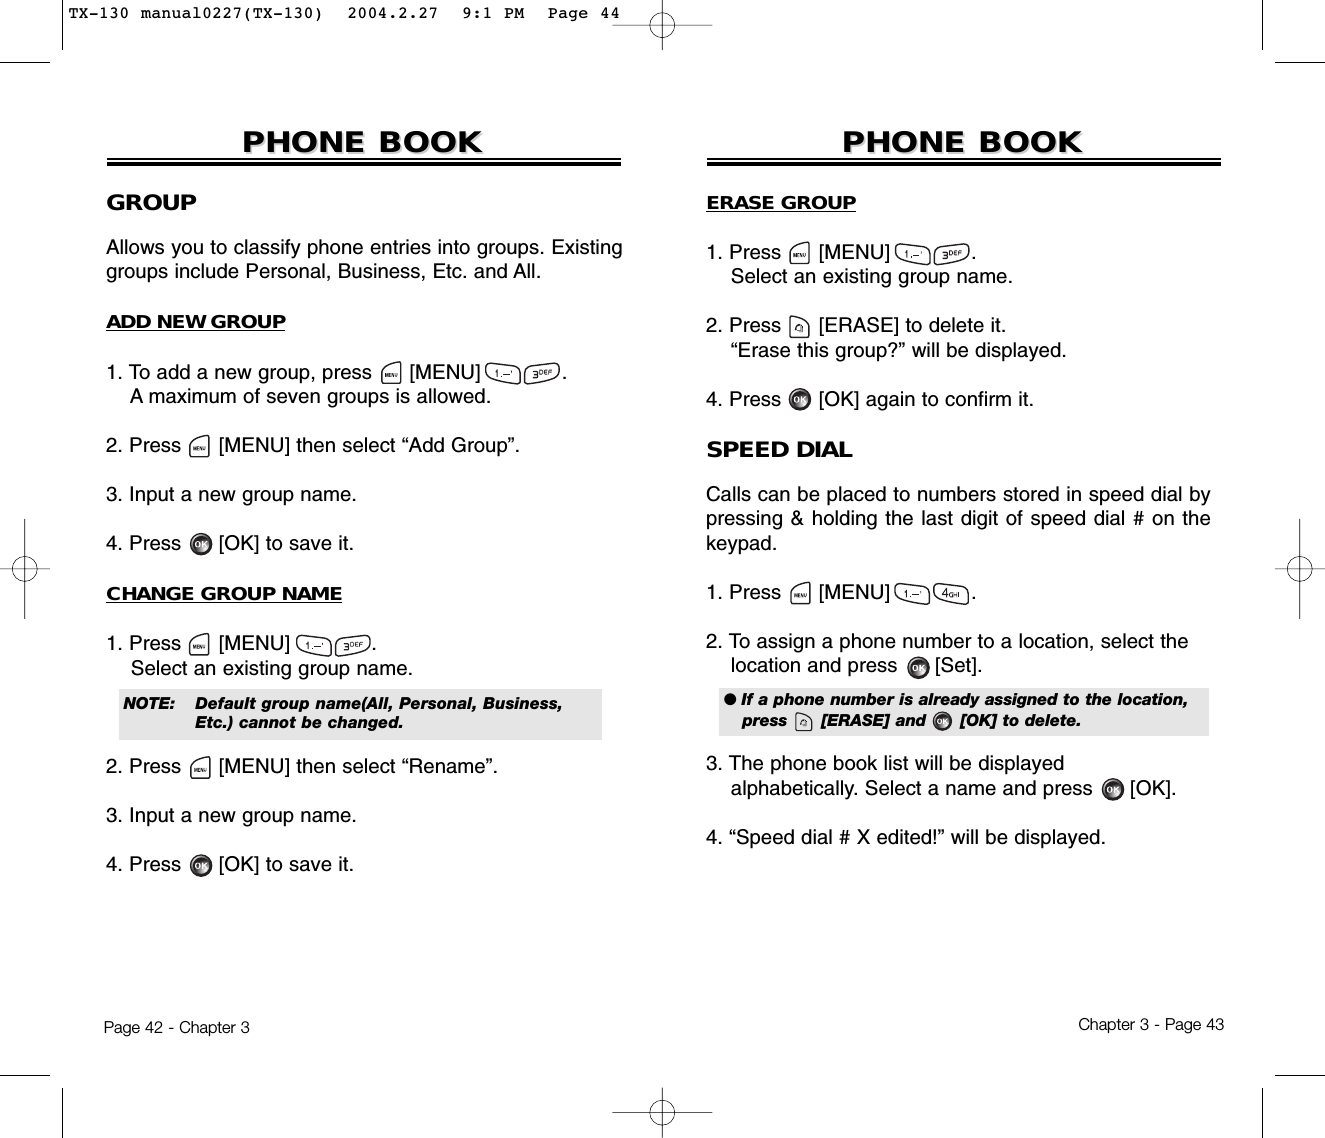 Chapter 3 - Page 43Page 42 - Chapter 3PHONE BOOKPHONE BOOKGROUPAllows you to classify phone entries into groups. Existinggroups include Personal, Business, Etc. and All.ADD NEW GROUP1. To add a new group, press      [MENU]             .A maximum of seven groups is allowed.2. Press [MENU] then select “Add Group”.3. Input a new group name.4. Press [OK] to save it.CHANGE GROUP NAME1. Press      [MENU]             .Select an existing group name.2. Press [MENU] then select “Rename”.3. Input a new group name.4. Press [OK] to save it.PHONE BOOKPHONE BOOKNOTE:Default group name(All, Personal, Business, Etc.) cannot be changed.ERASE GROUP1. Press      [MENU]             .Select an existing group name.2. Press [ERASE] to delete it.“Erase this group?” will be displayed.4. Press [OK] again to confirm it.SPEED DIALCalls can be placed to numbers stored in speed dial bypressing &amp; holding the last digit of speed dial # on thekeypad.1. Press      [MENU]             .2. To assign a phone number to a location, select the  location and press [Set].3. The phone book list will be displayed alphabetically. Select a name and press      [OK].4. “Speed dial # X edited!” will be displayed.● If a phone number is already assigned to the location,press      [ERASE] and      [OK] to delete.TX-130 manual0227(TX-130)  2004.2.27  9:1 PM  Page 44